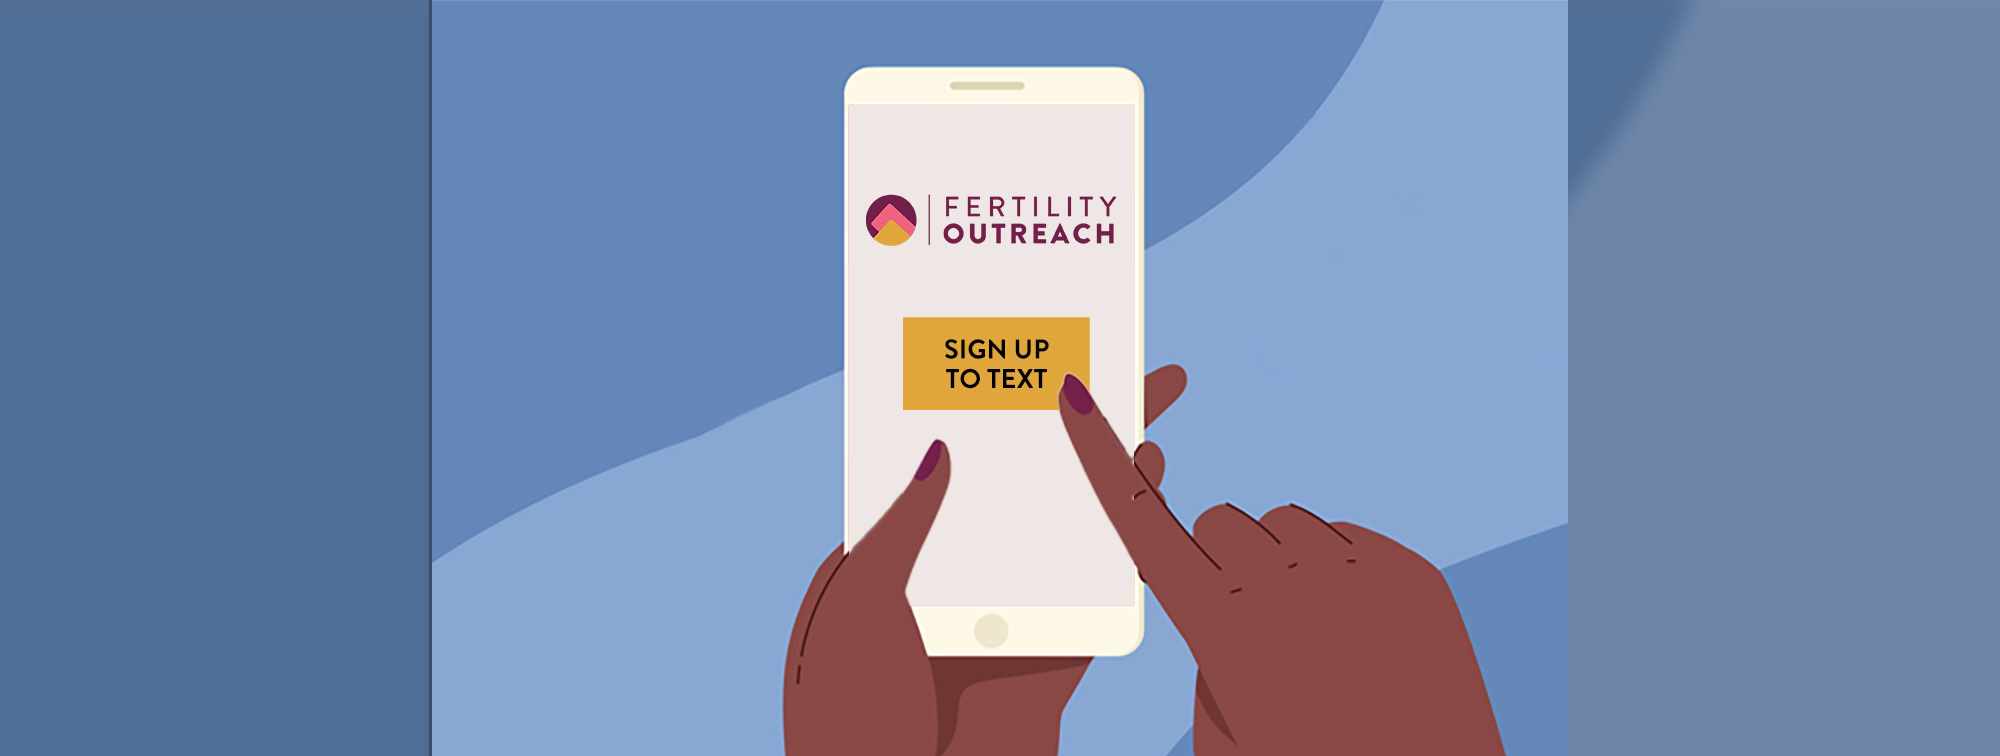 Fertility Outreach - SIGN UP TO TEXT